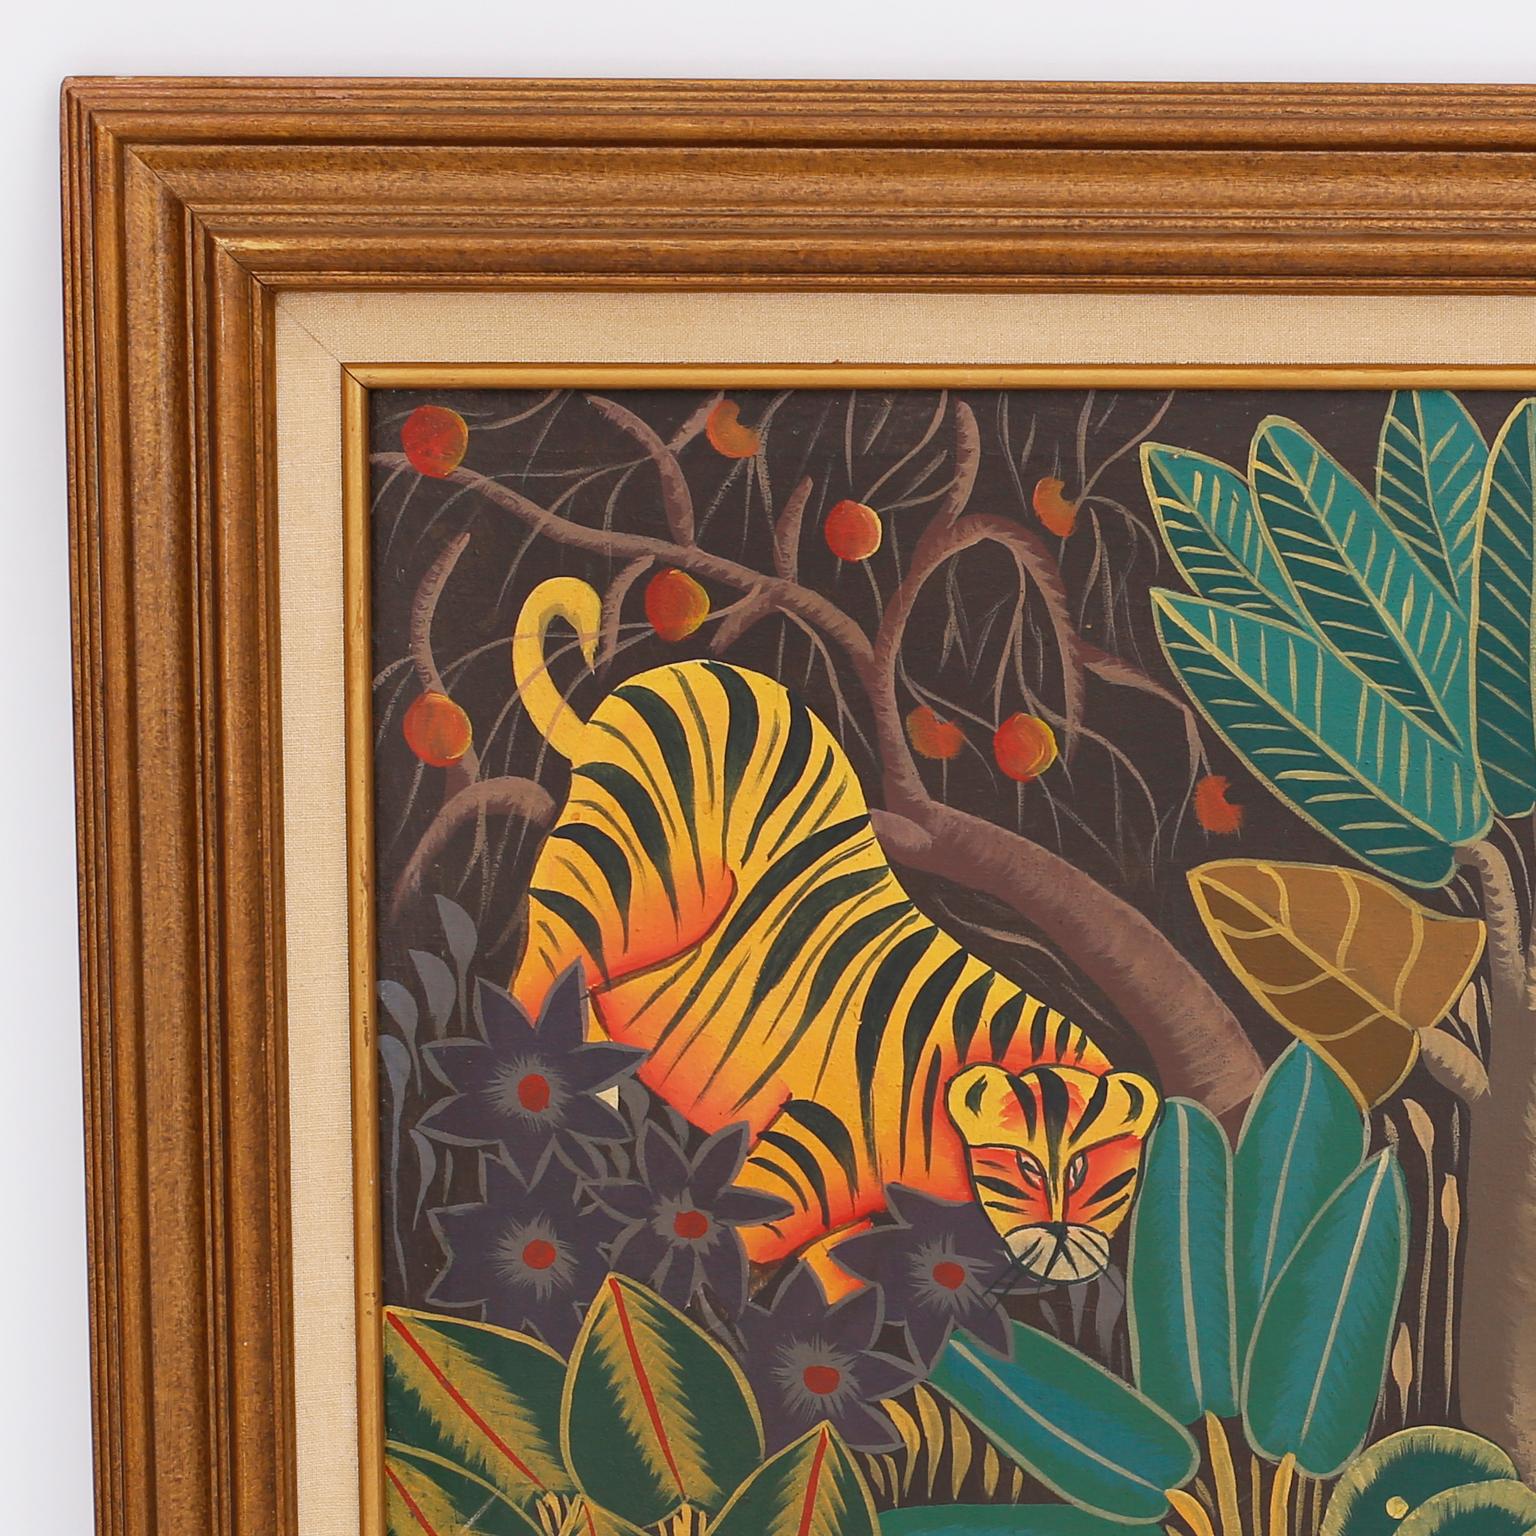 Whimsical oil painting on canvas with tigers and elephants in a stylized jungle setting, painted in a folky, naive style typical of Haitian artists. Signed Yvon at the bottom and presented in a wood frame.